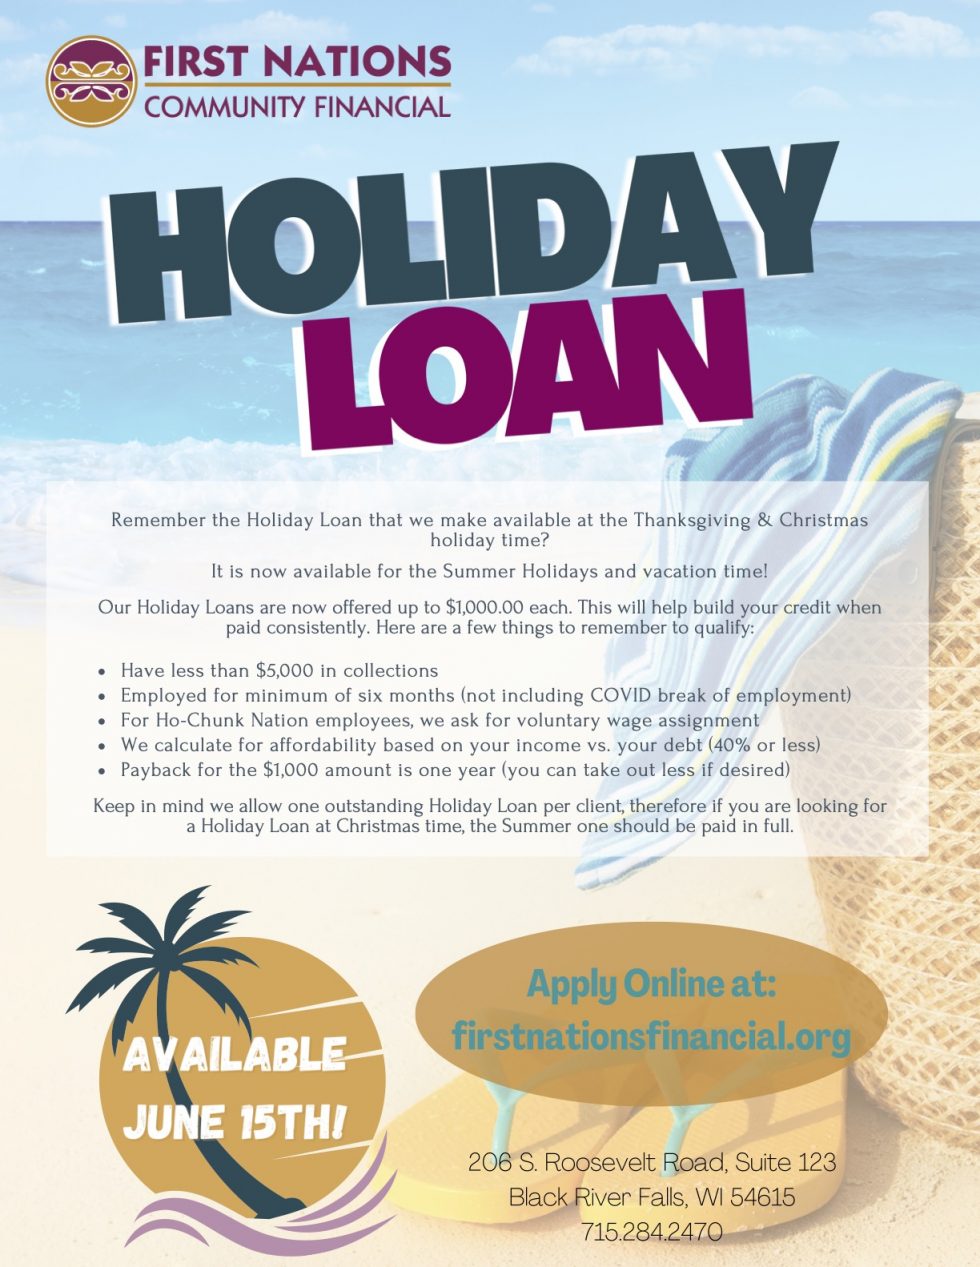 FNCF Holiday Loan First Nations Financial